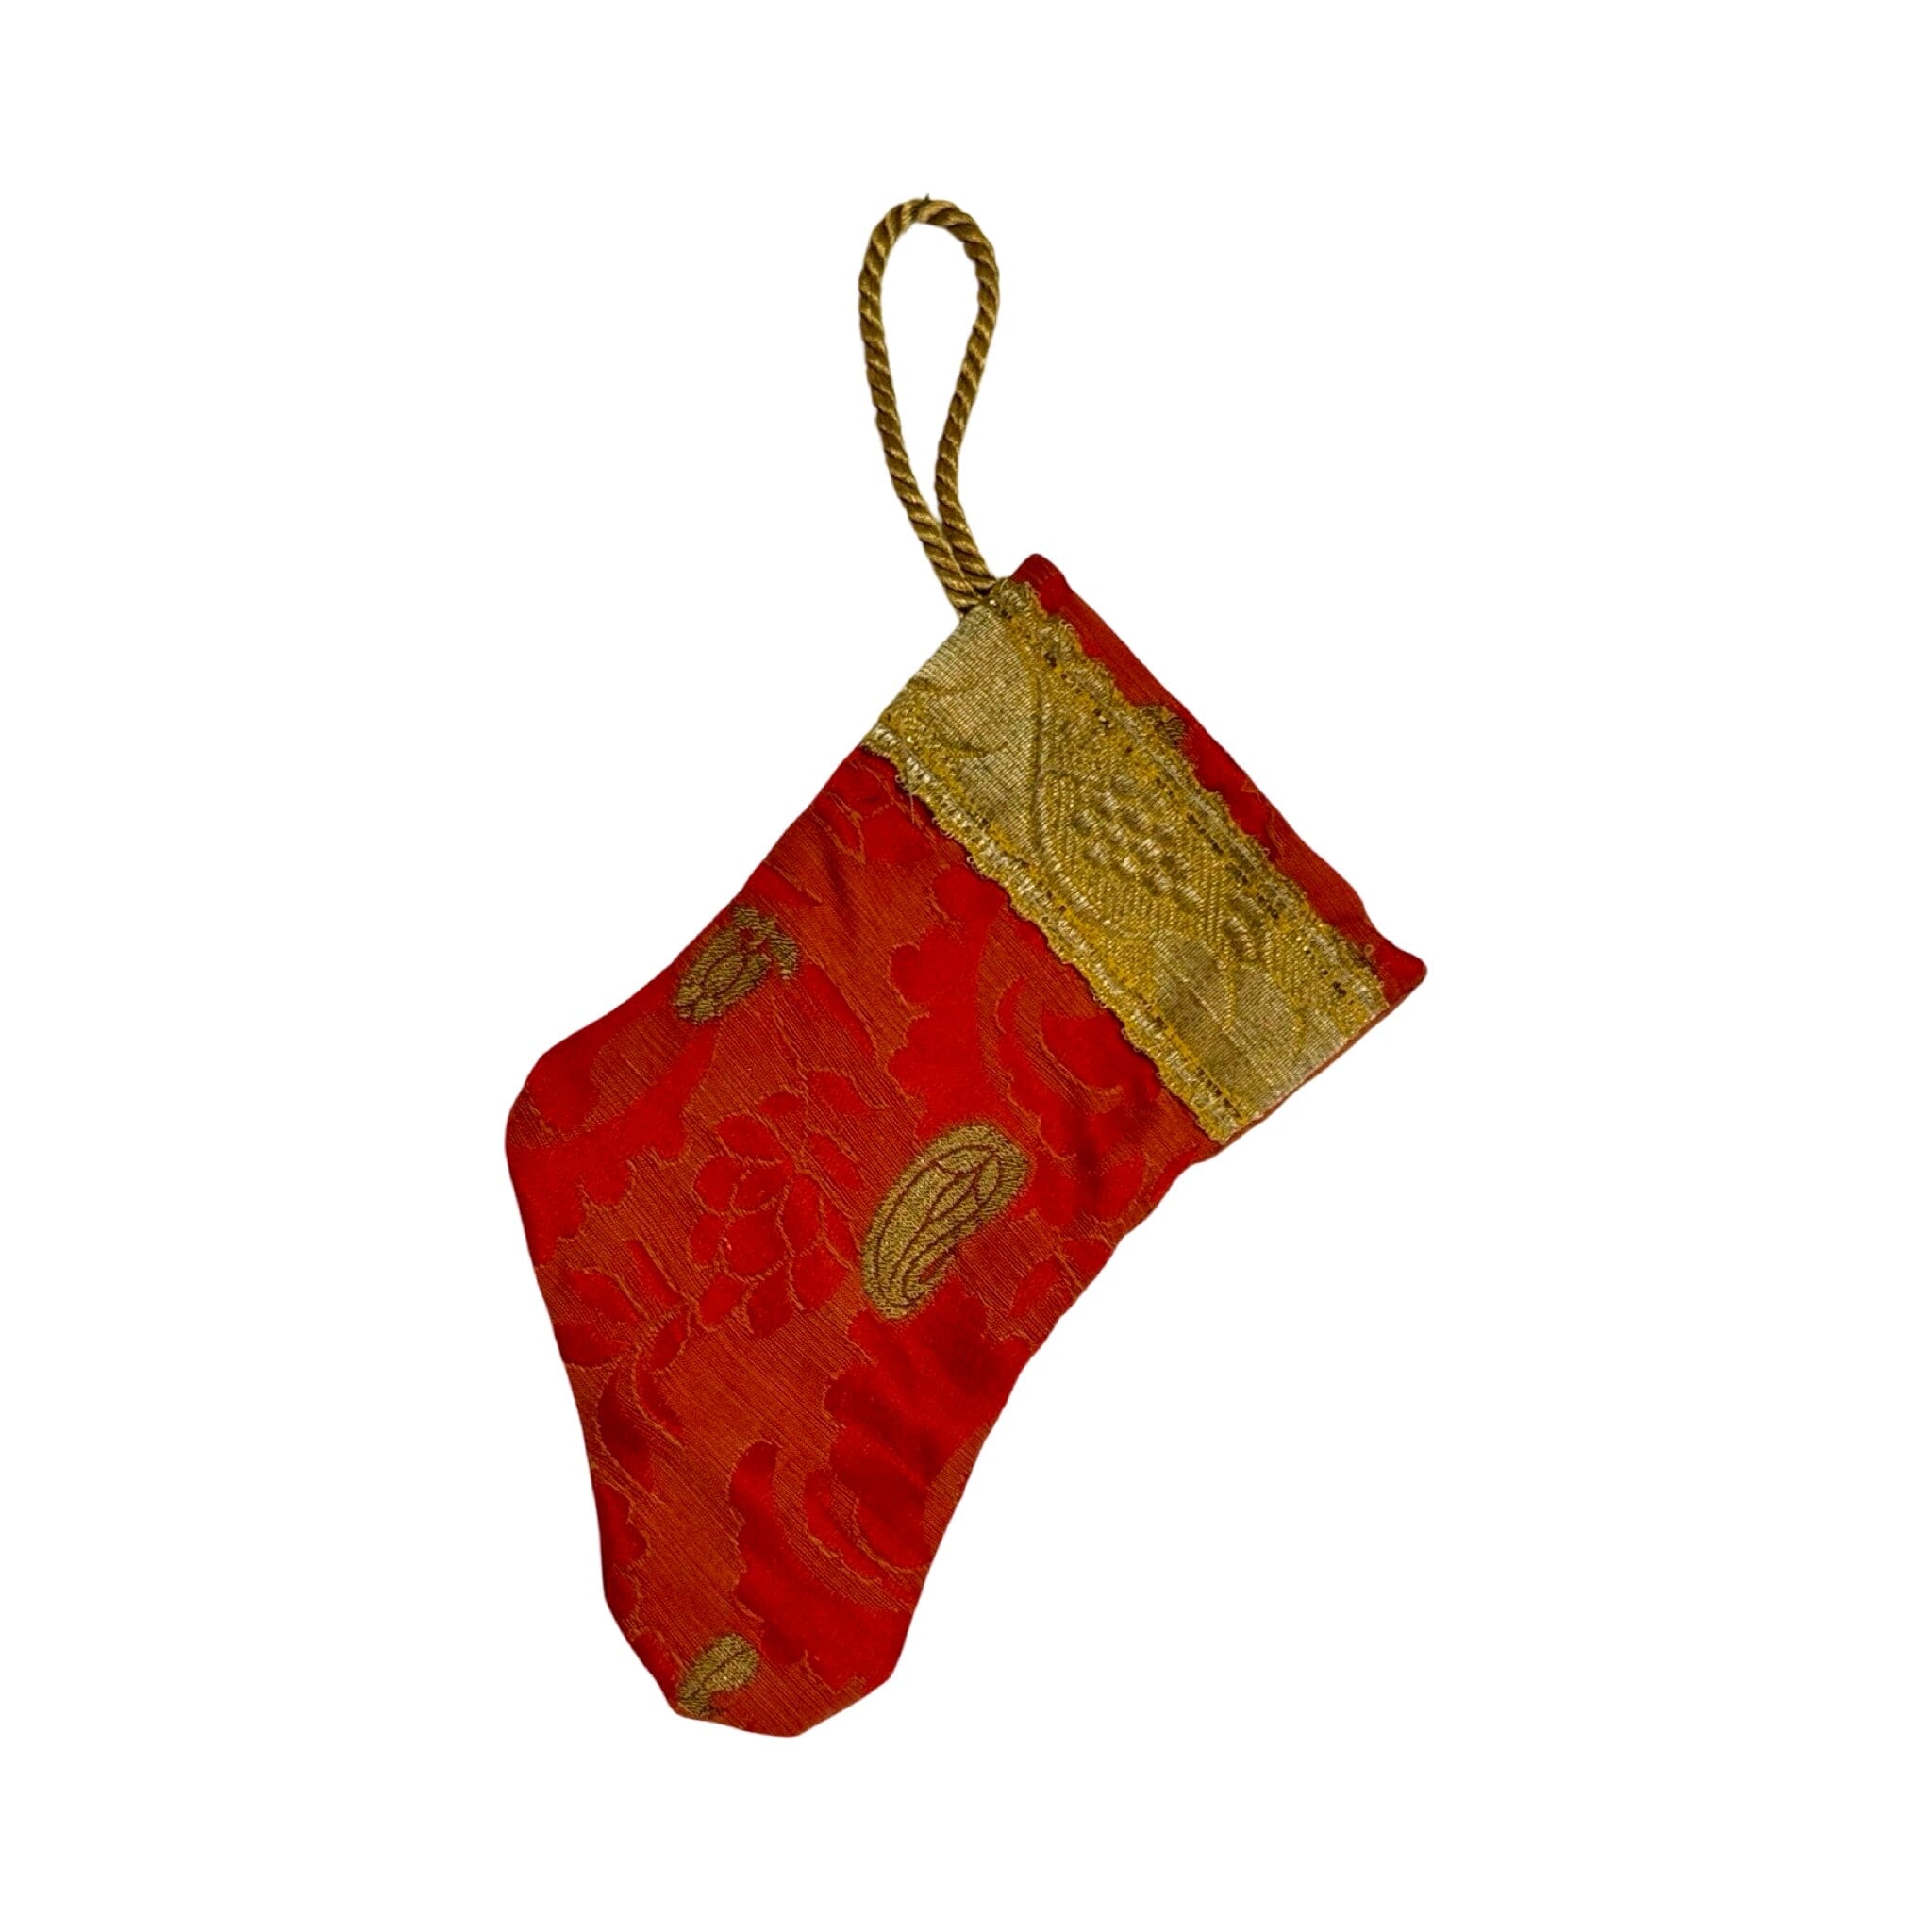 Handmade Mini Stocking Made From Vintage Fabric and Trims- Red and Gold Ornament B. Viz Design F 